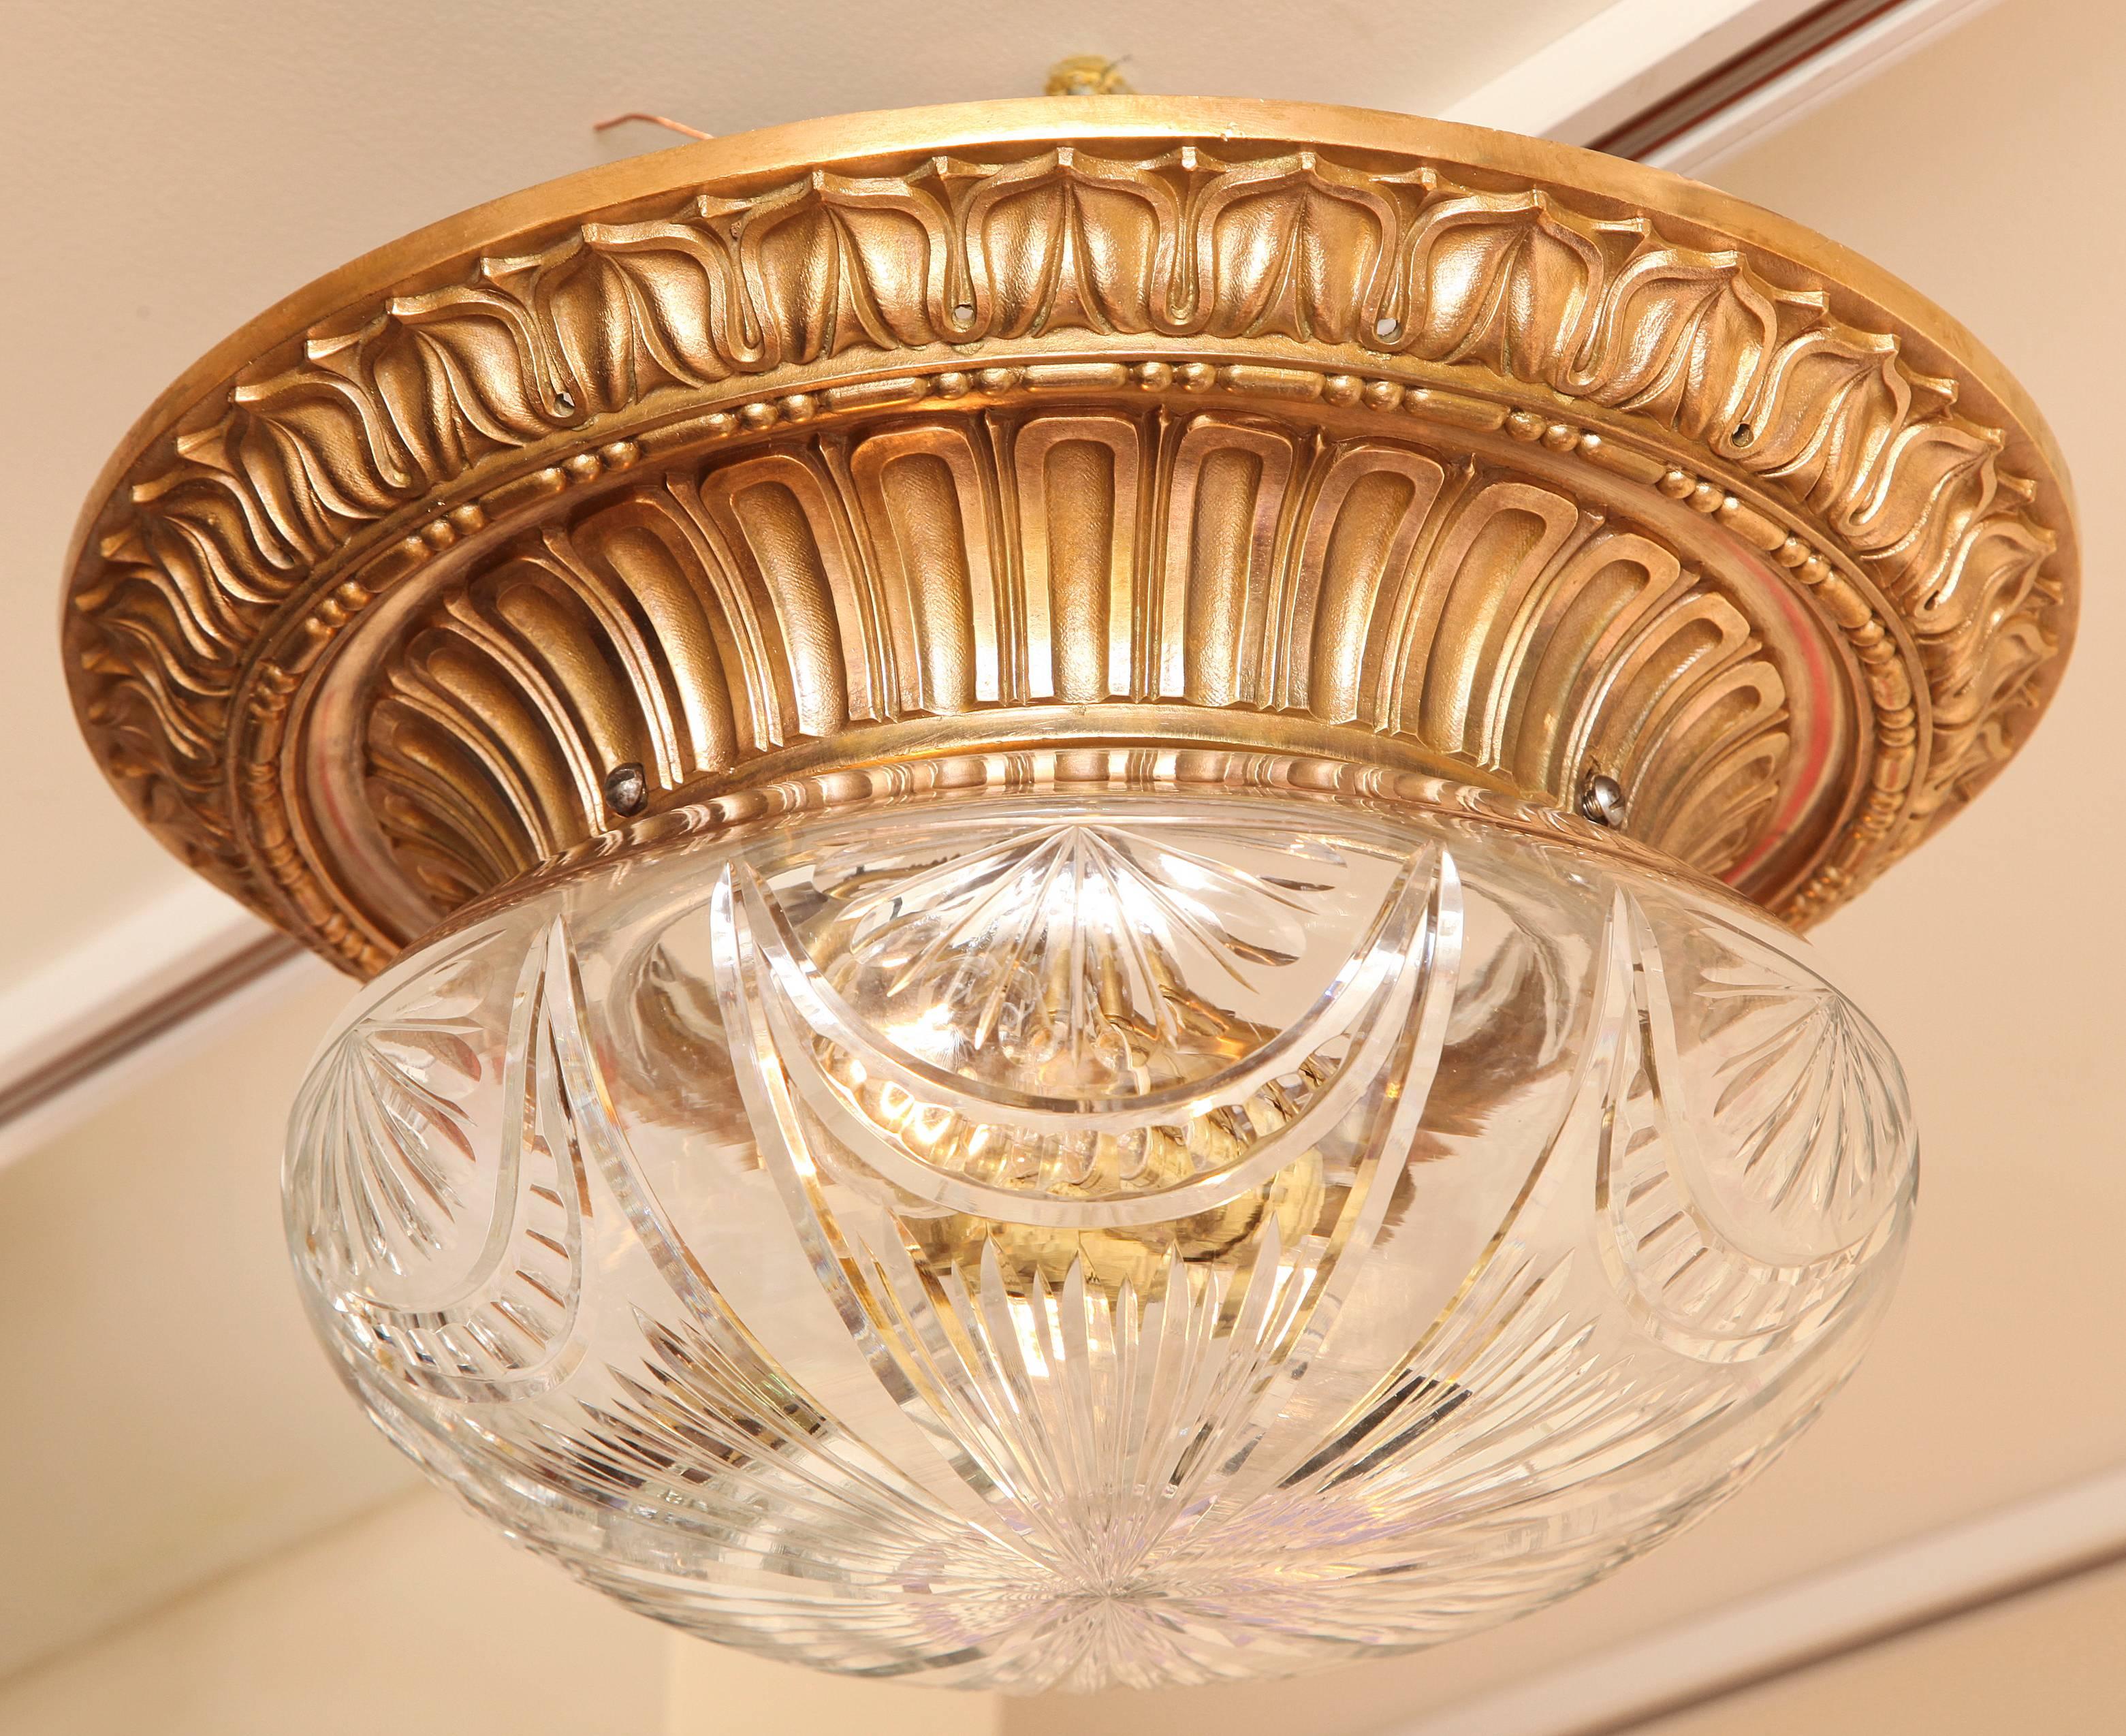 An American bronze flush mounted fixture by maker Caldwell. The round frame with leaf tip border surrounding arch fluted inner rim securing dome shaped cut-glass shade with radically symmetrical curved lines pattern concealing two Edison sockets.